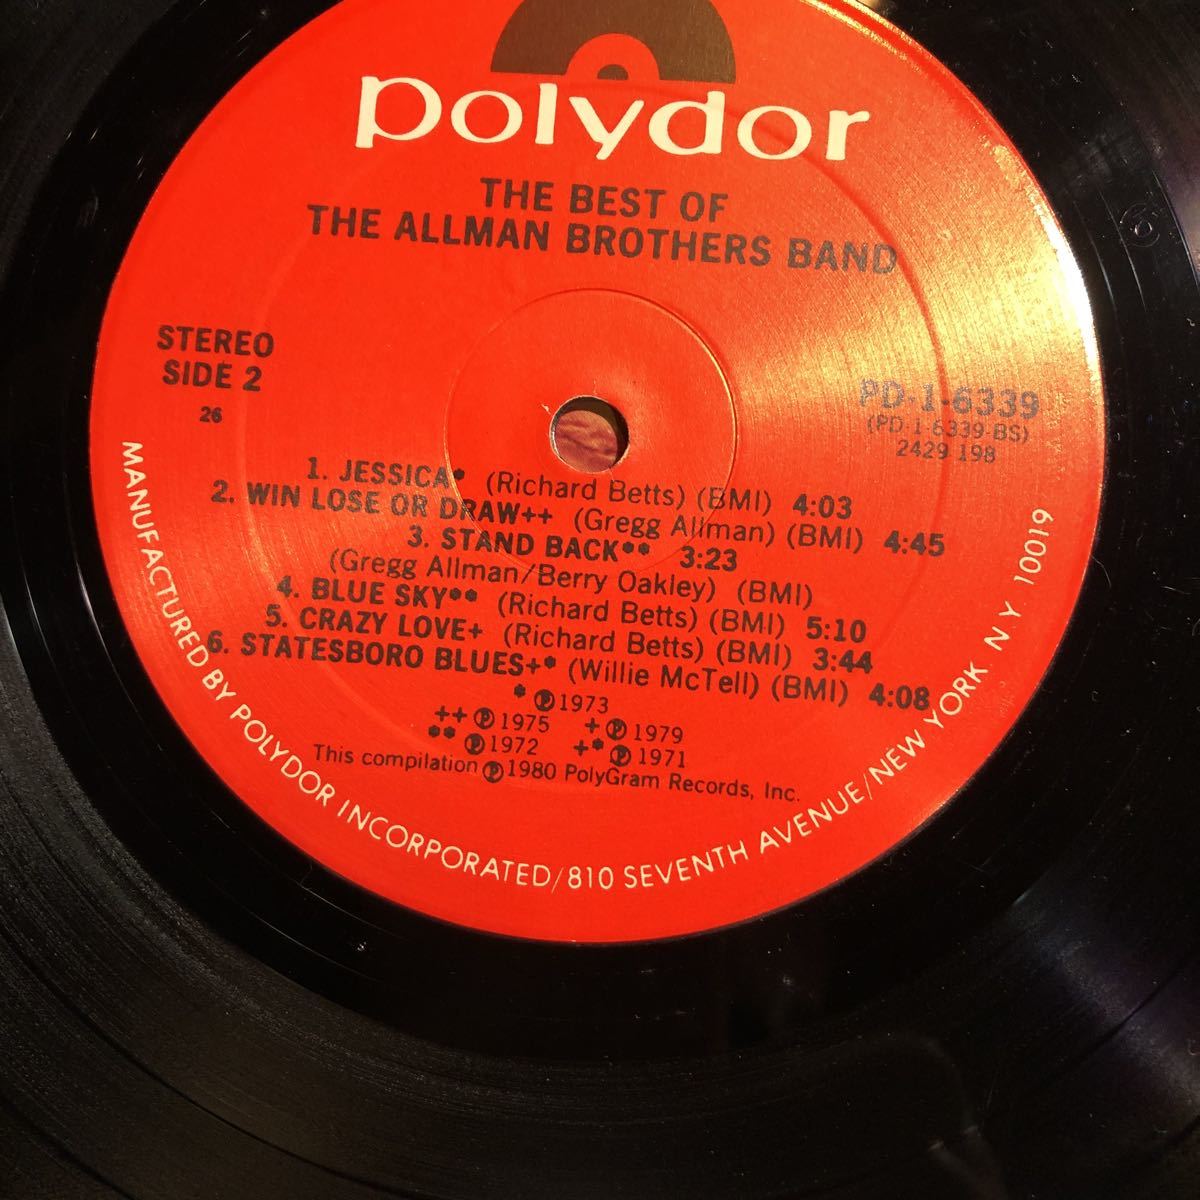 The best of the Allman brothers band pd-1-6339 polydor us_画像7